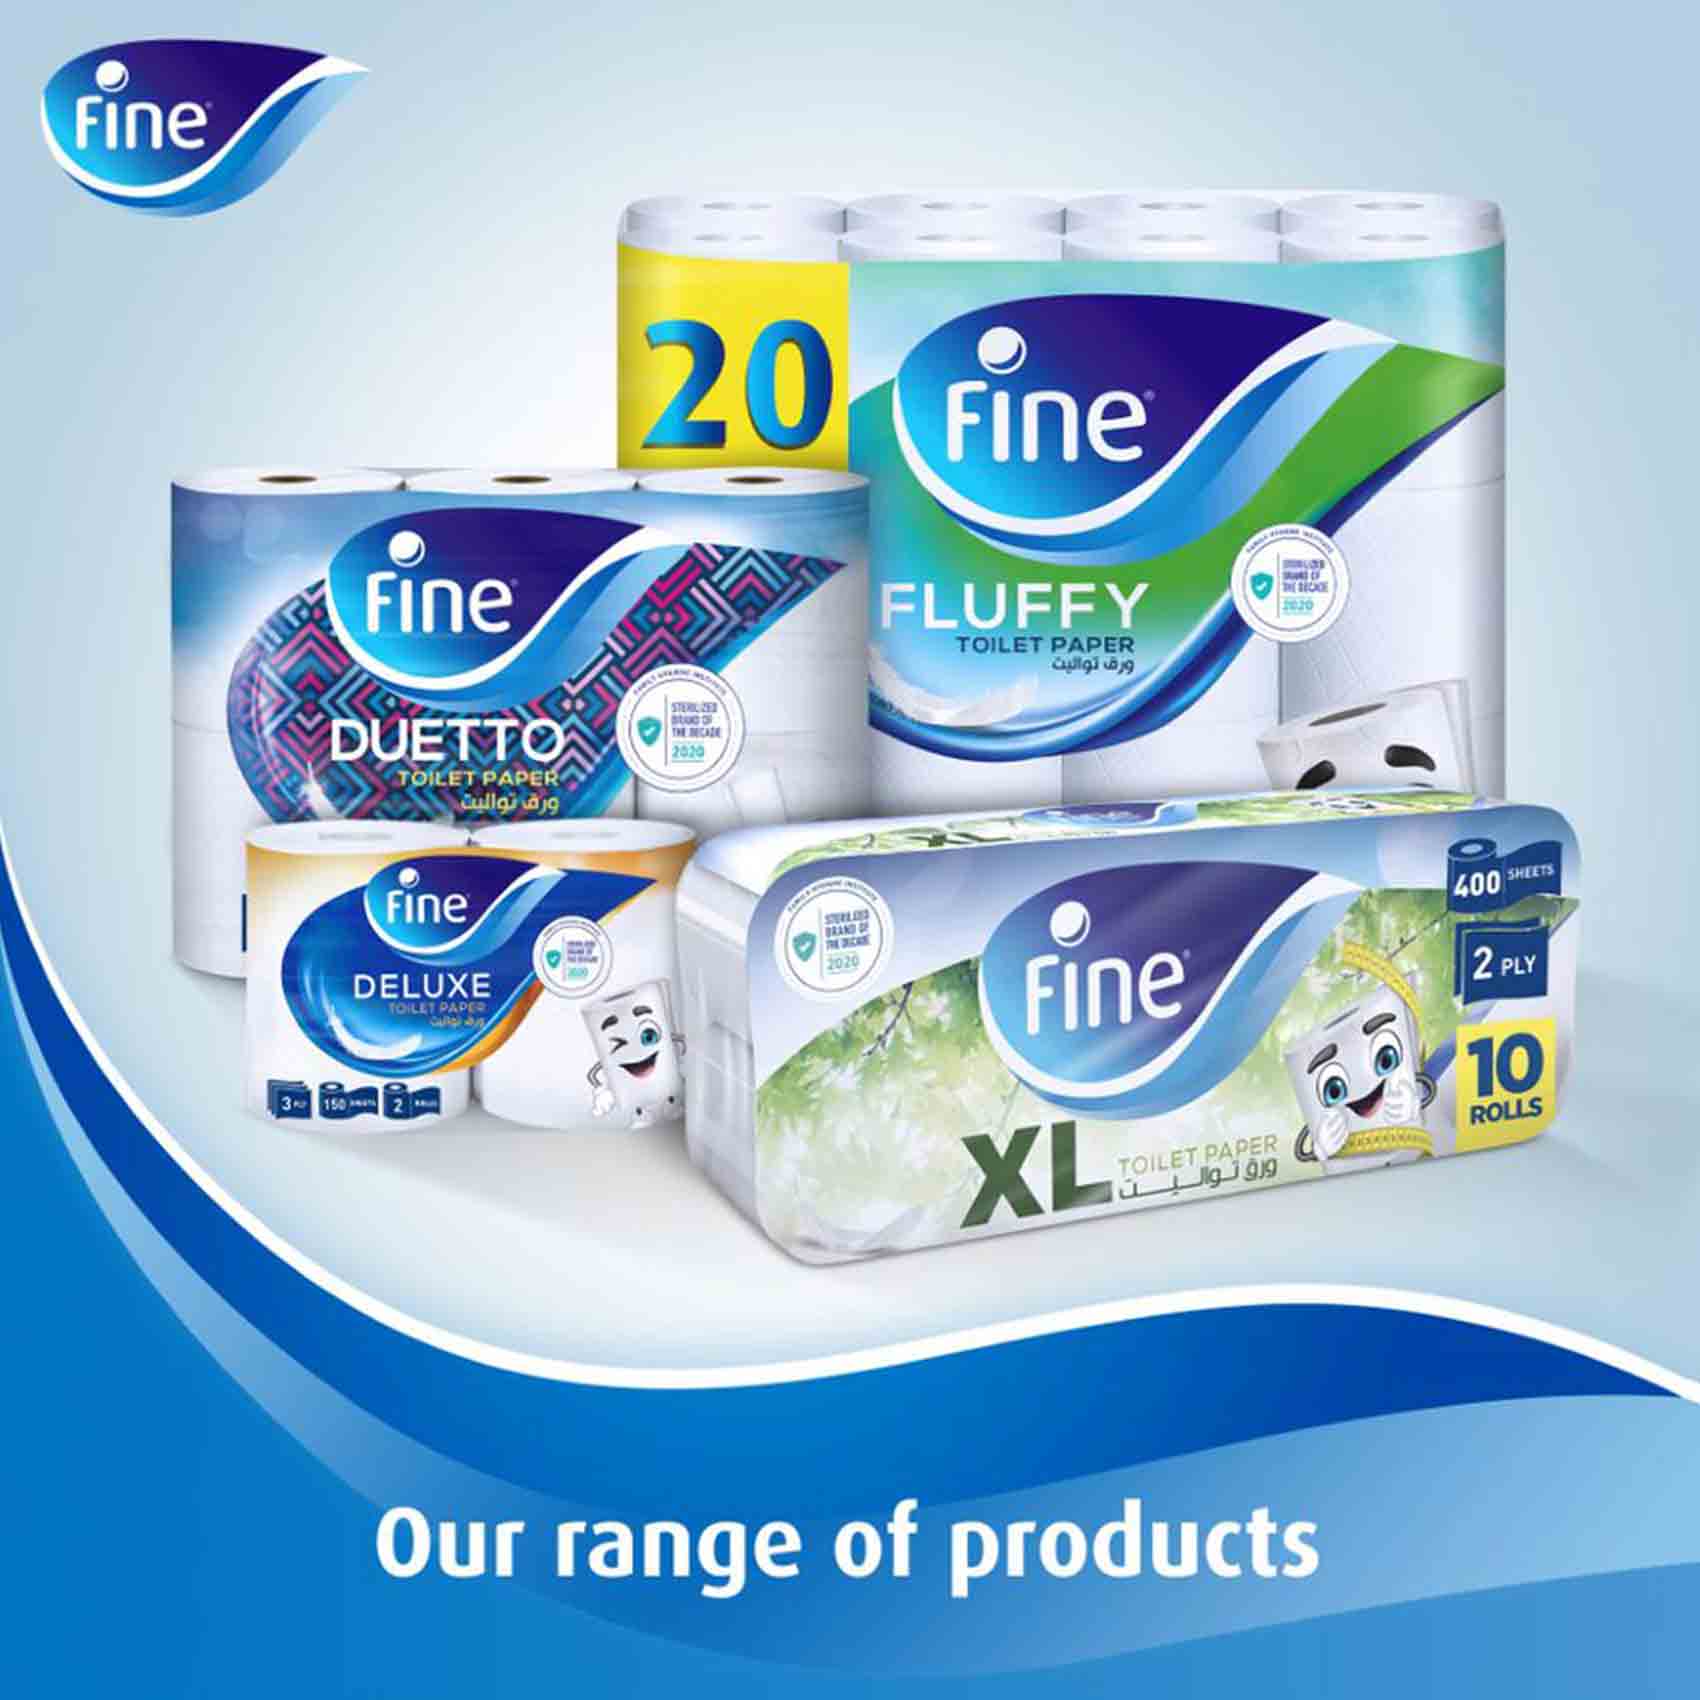 Fine Toilet Deluxe Tissues 150 Sheets 3 Ply 10 Rolls